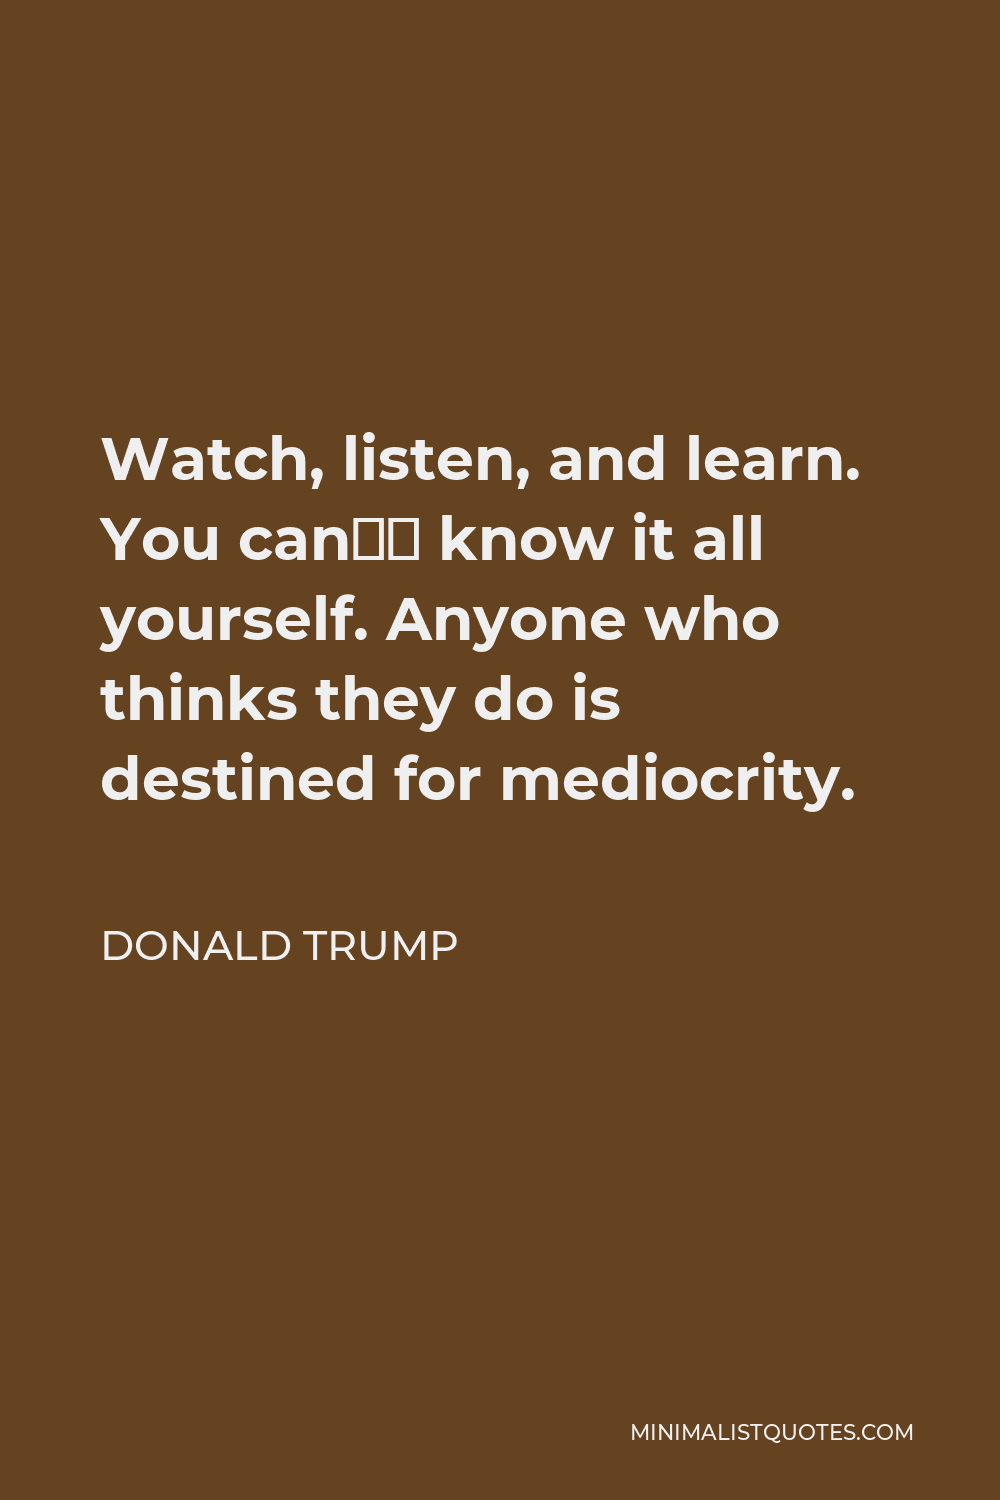 Donald Trump Quote - Watch, listen, and learn. You can’t know it all yourself. Anyone who thinks they do is destined for mediocrity.